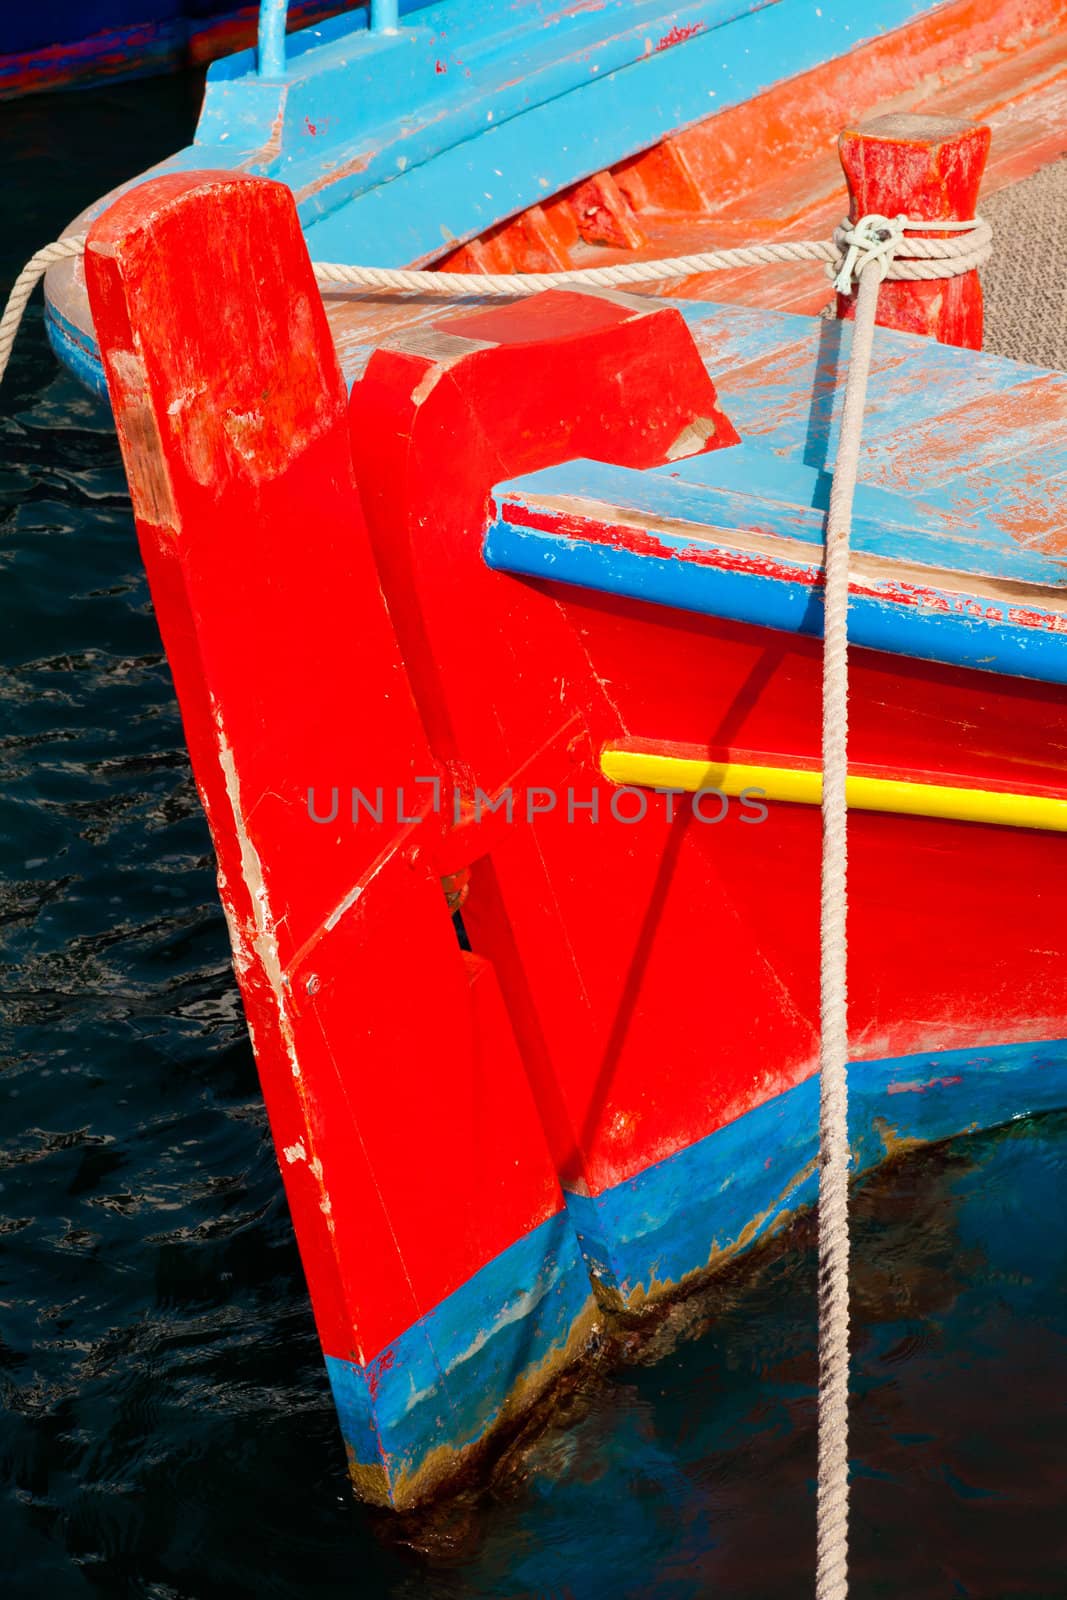 Stern and rudder of small old greek fishing boat moored in harbor.